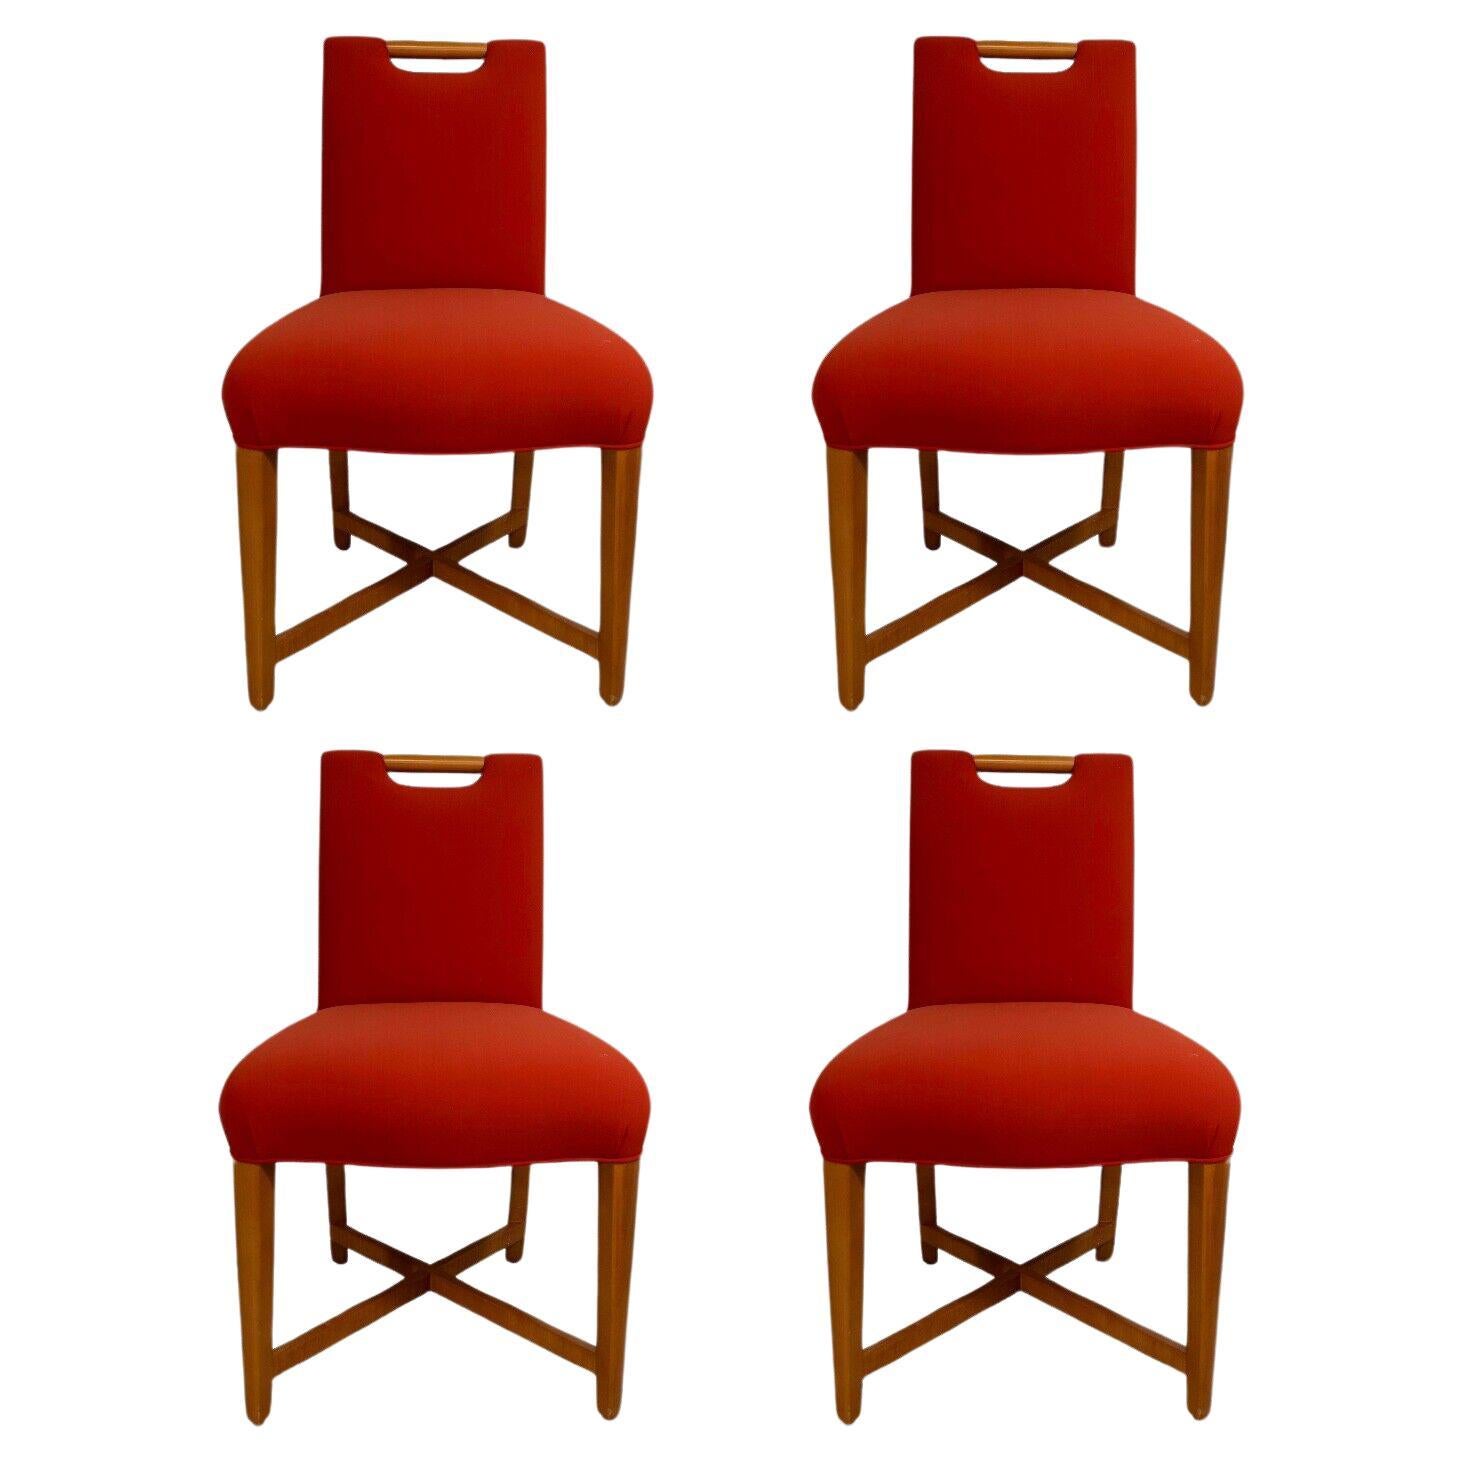 Donghia Set of 4 Orange and Wood Side Chairs Mid Century Modern Contemporary For Sale